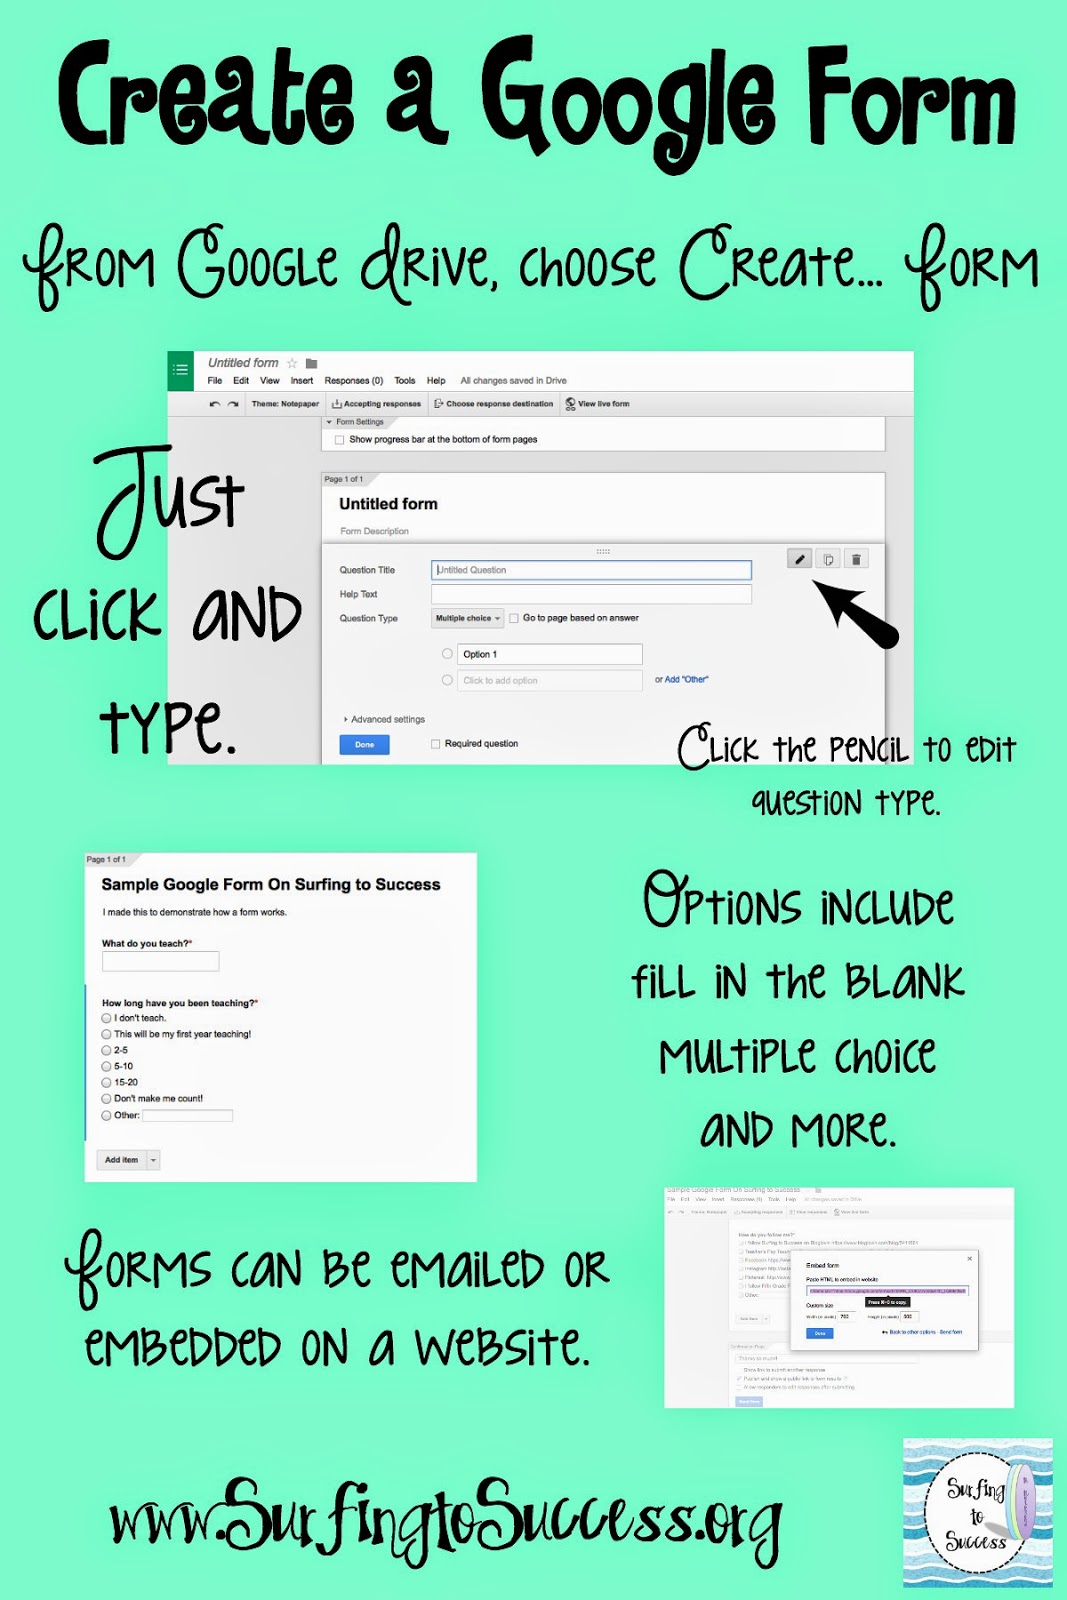 Creating a Google Form to Gather Info - Surfing to Success